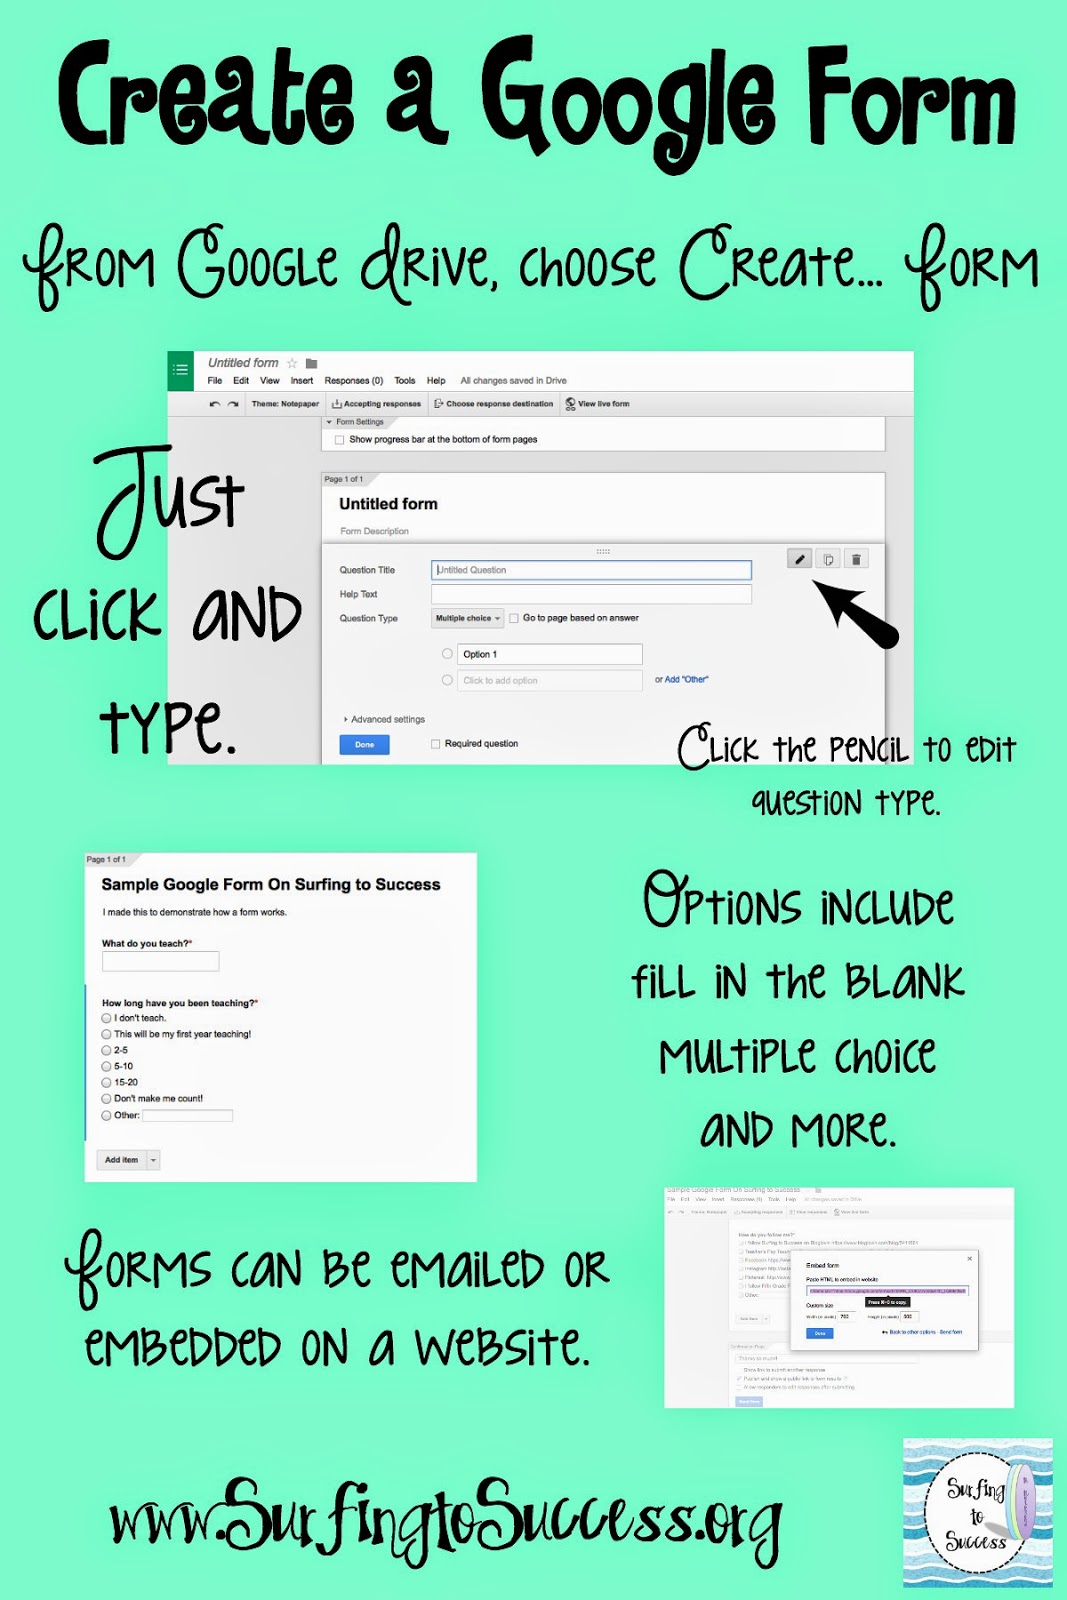 Creating a Google Form to Gather Info - Surfing to Success